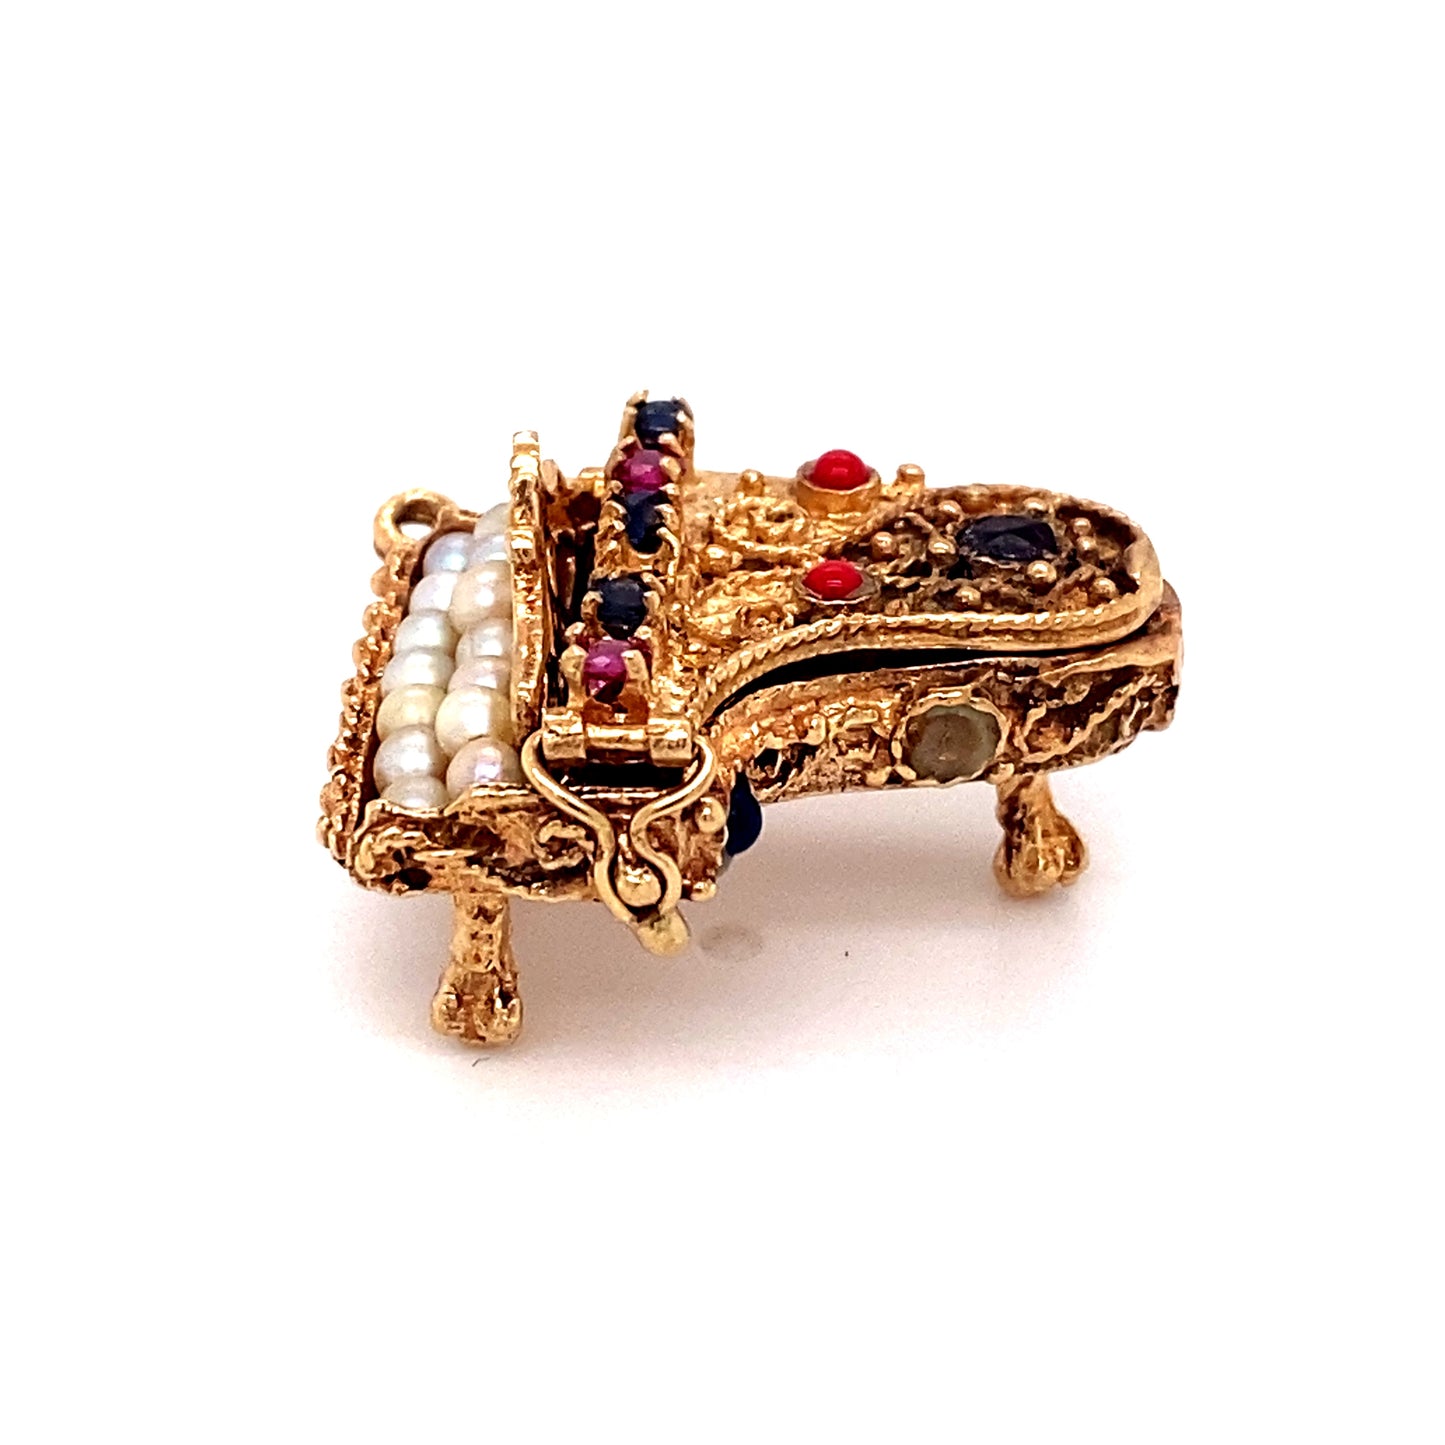 Circa 1950 Pearl, Ruby and Sapphire Articulated Piano Pendant in 14 Karat Gold